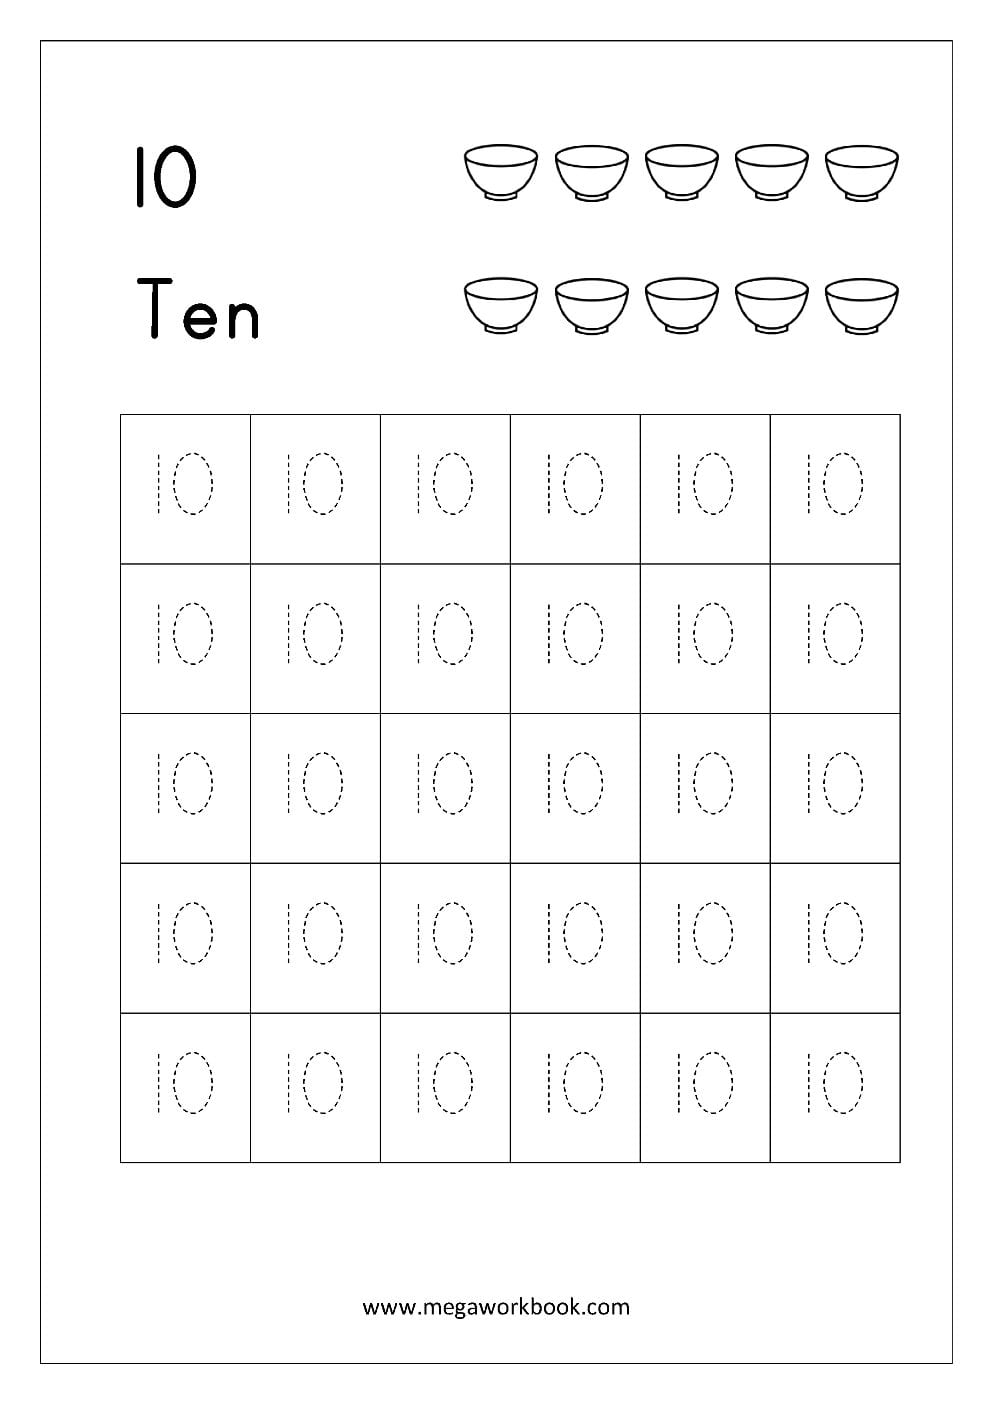 Free Printable Number Tracing And Writing 110 Worksheets Along With Number Tracing Worksheets 1 10